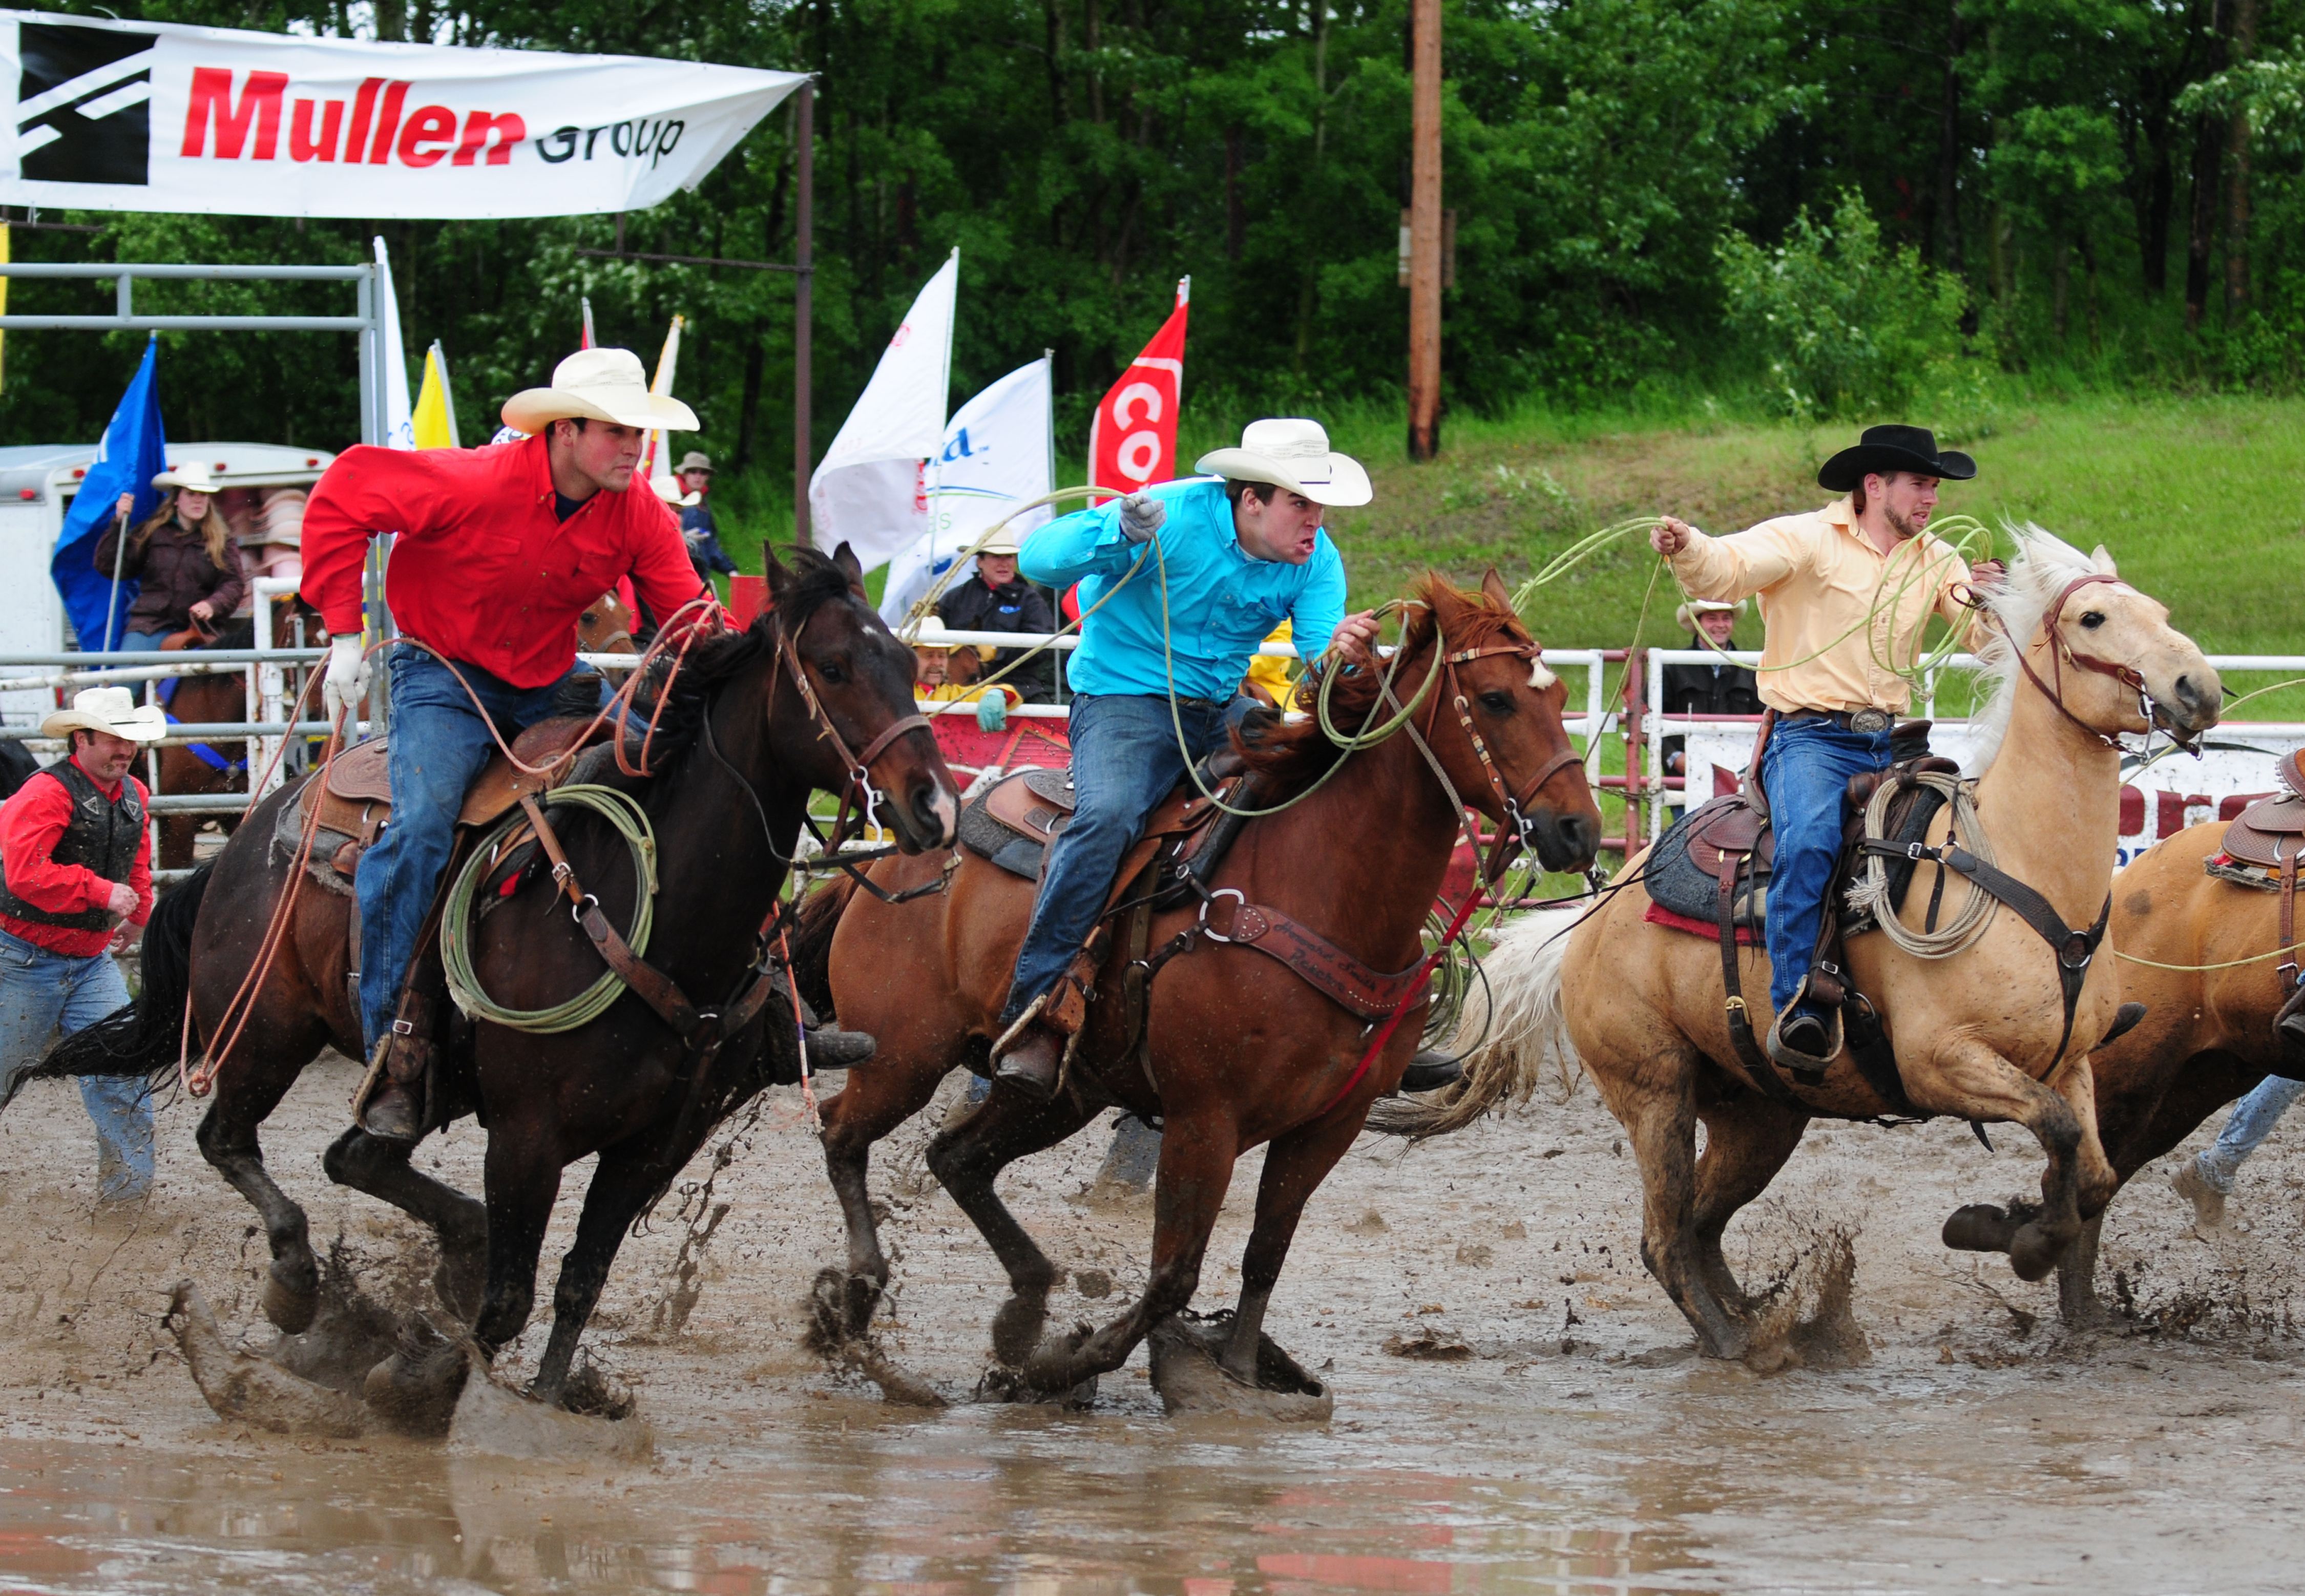 FULL FORCE -  Riders storm out of the gates during the wild cow milking competition at the 51st Annual Innisfail Professional Rodeo this past weekend which was held at the Daines Ranch.